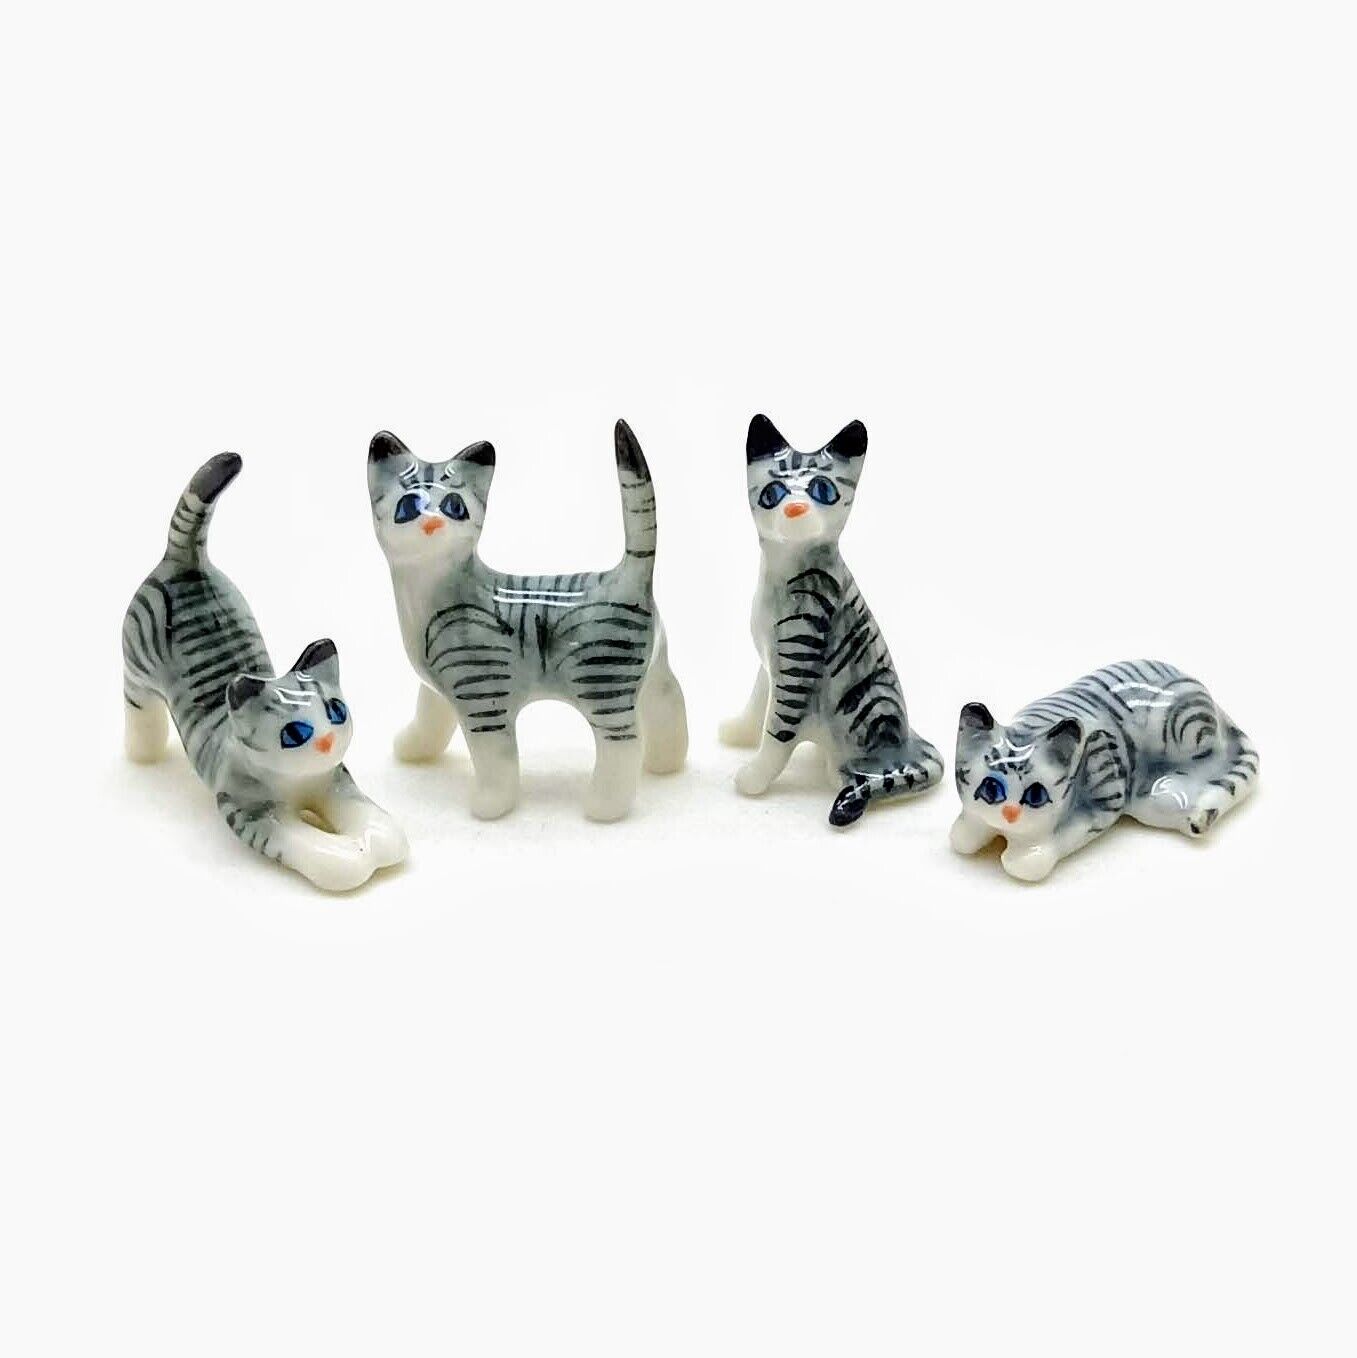 4 Tiny Grey Kitten Cats, Hand-Painted Ceramic Figurines for Dollhouse Decoration